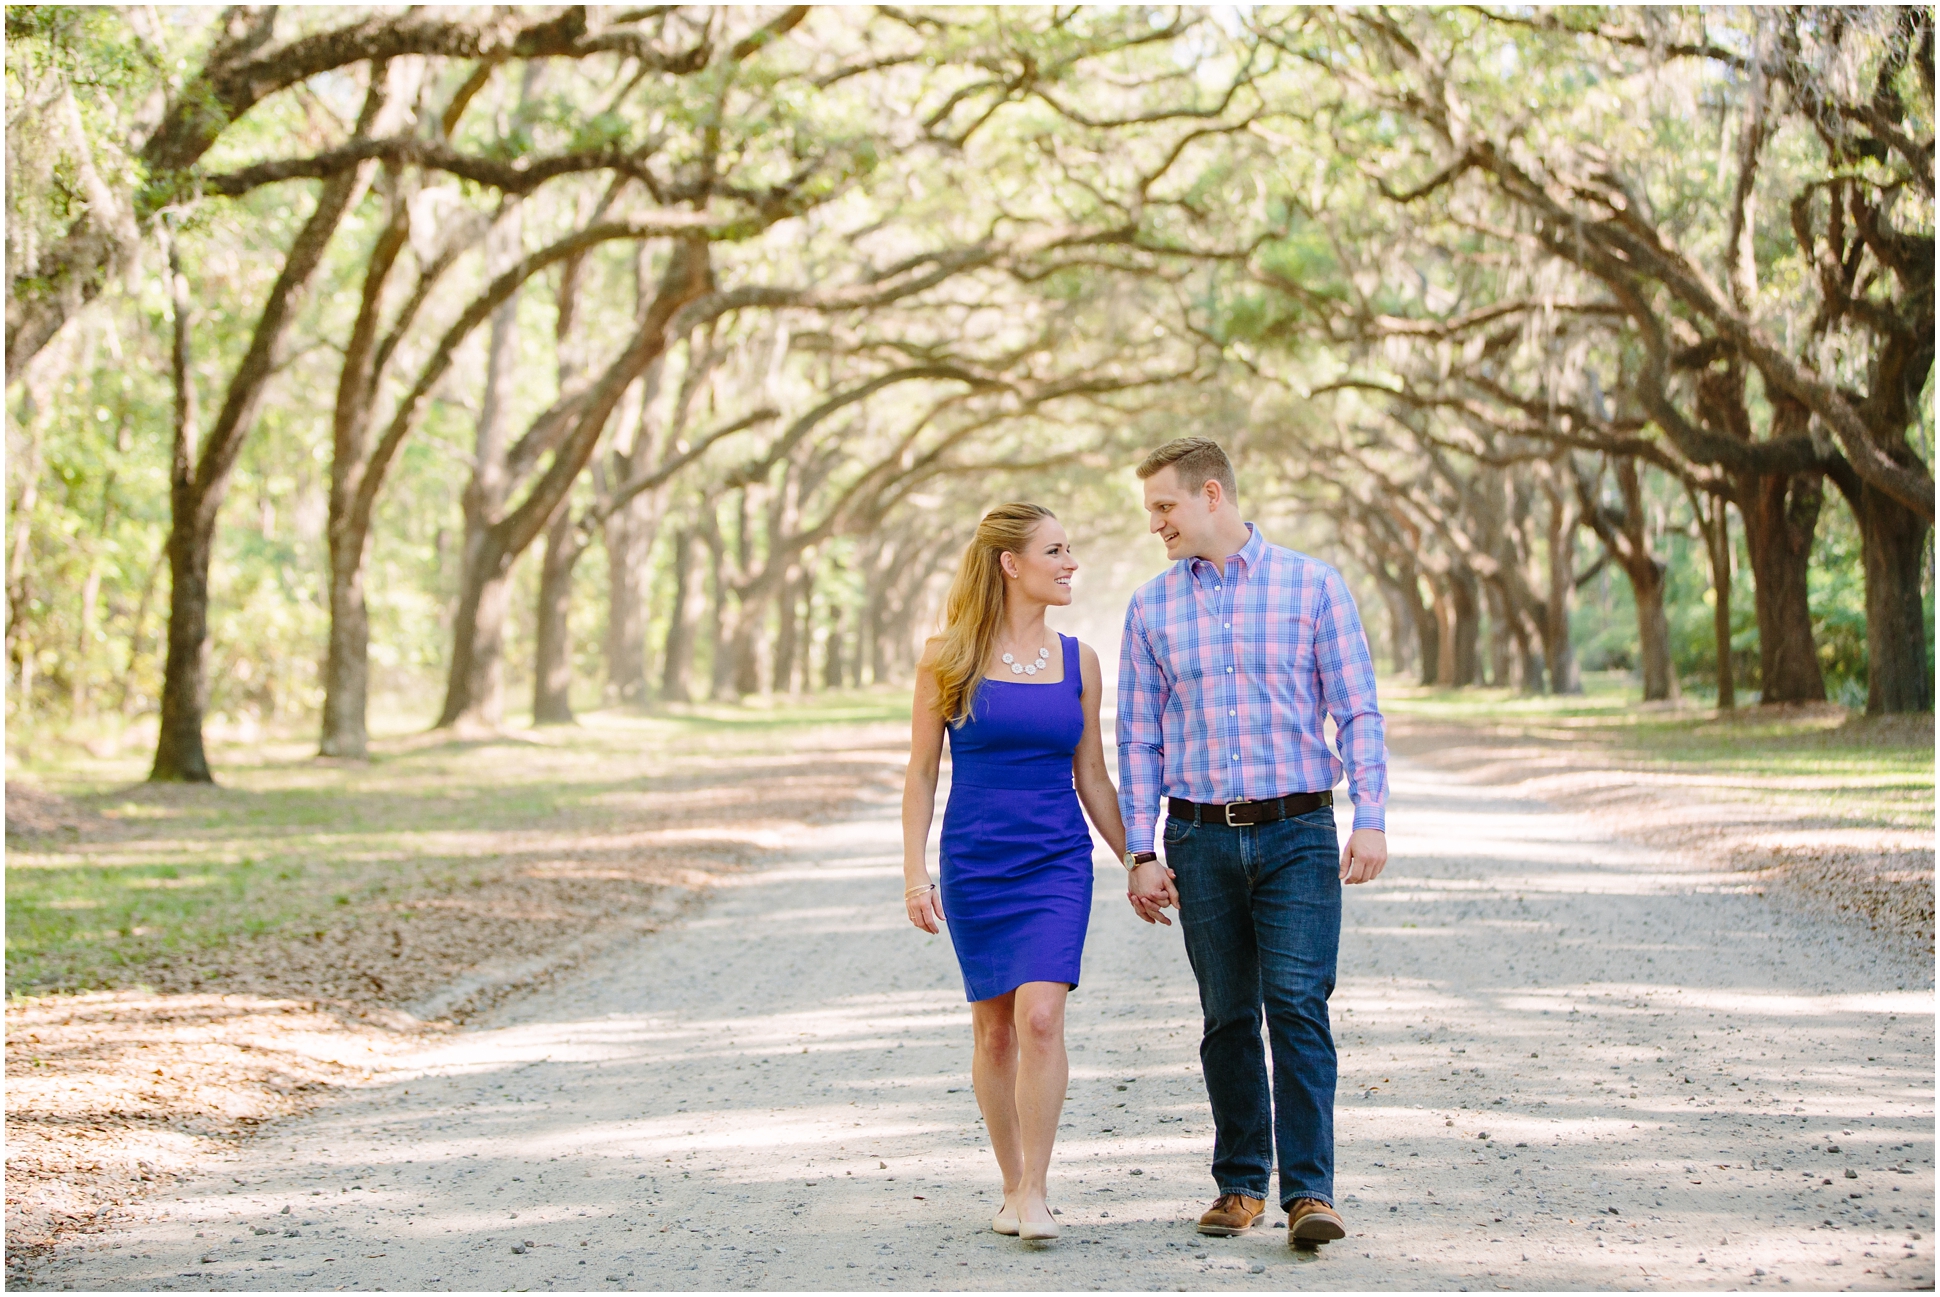 Two Chics Photography | A Wormsloe Plantation and Historic Savannah Georgia Engagement Session | www.twochicsphotography.com